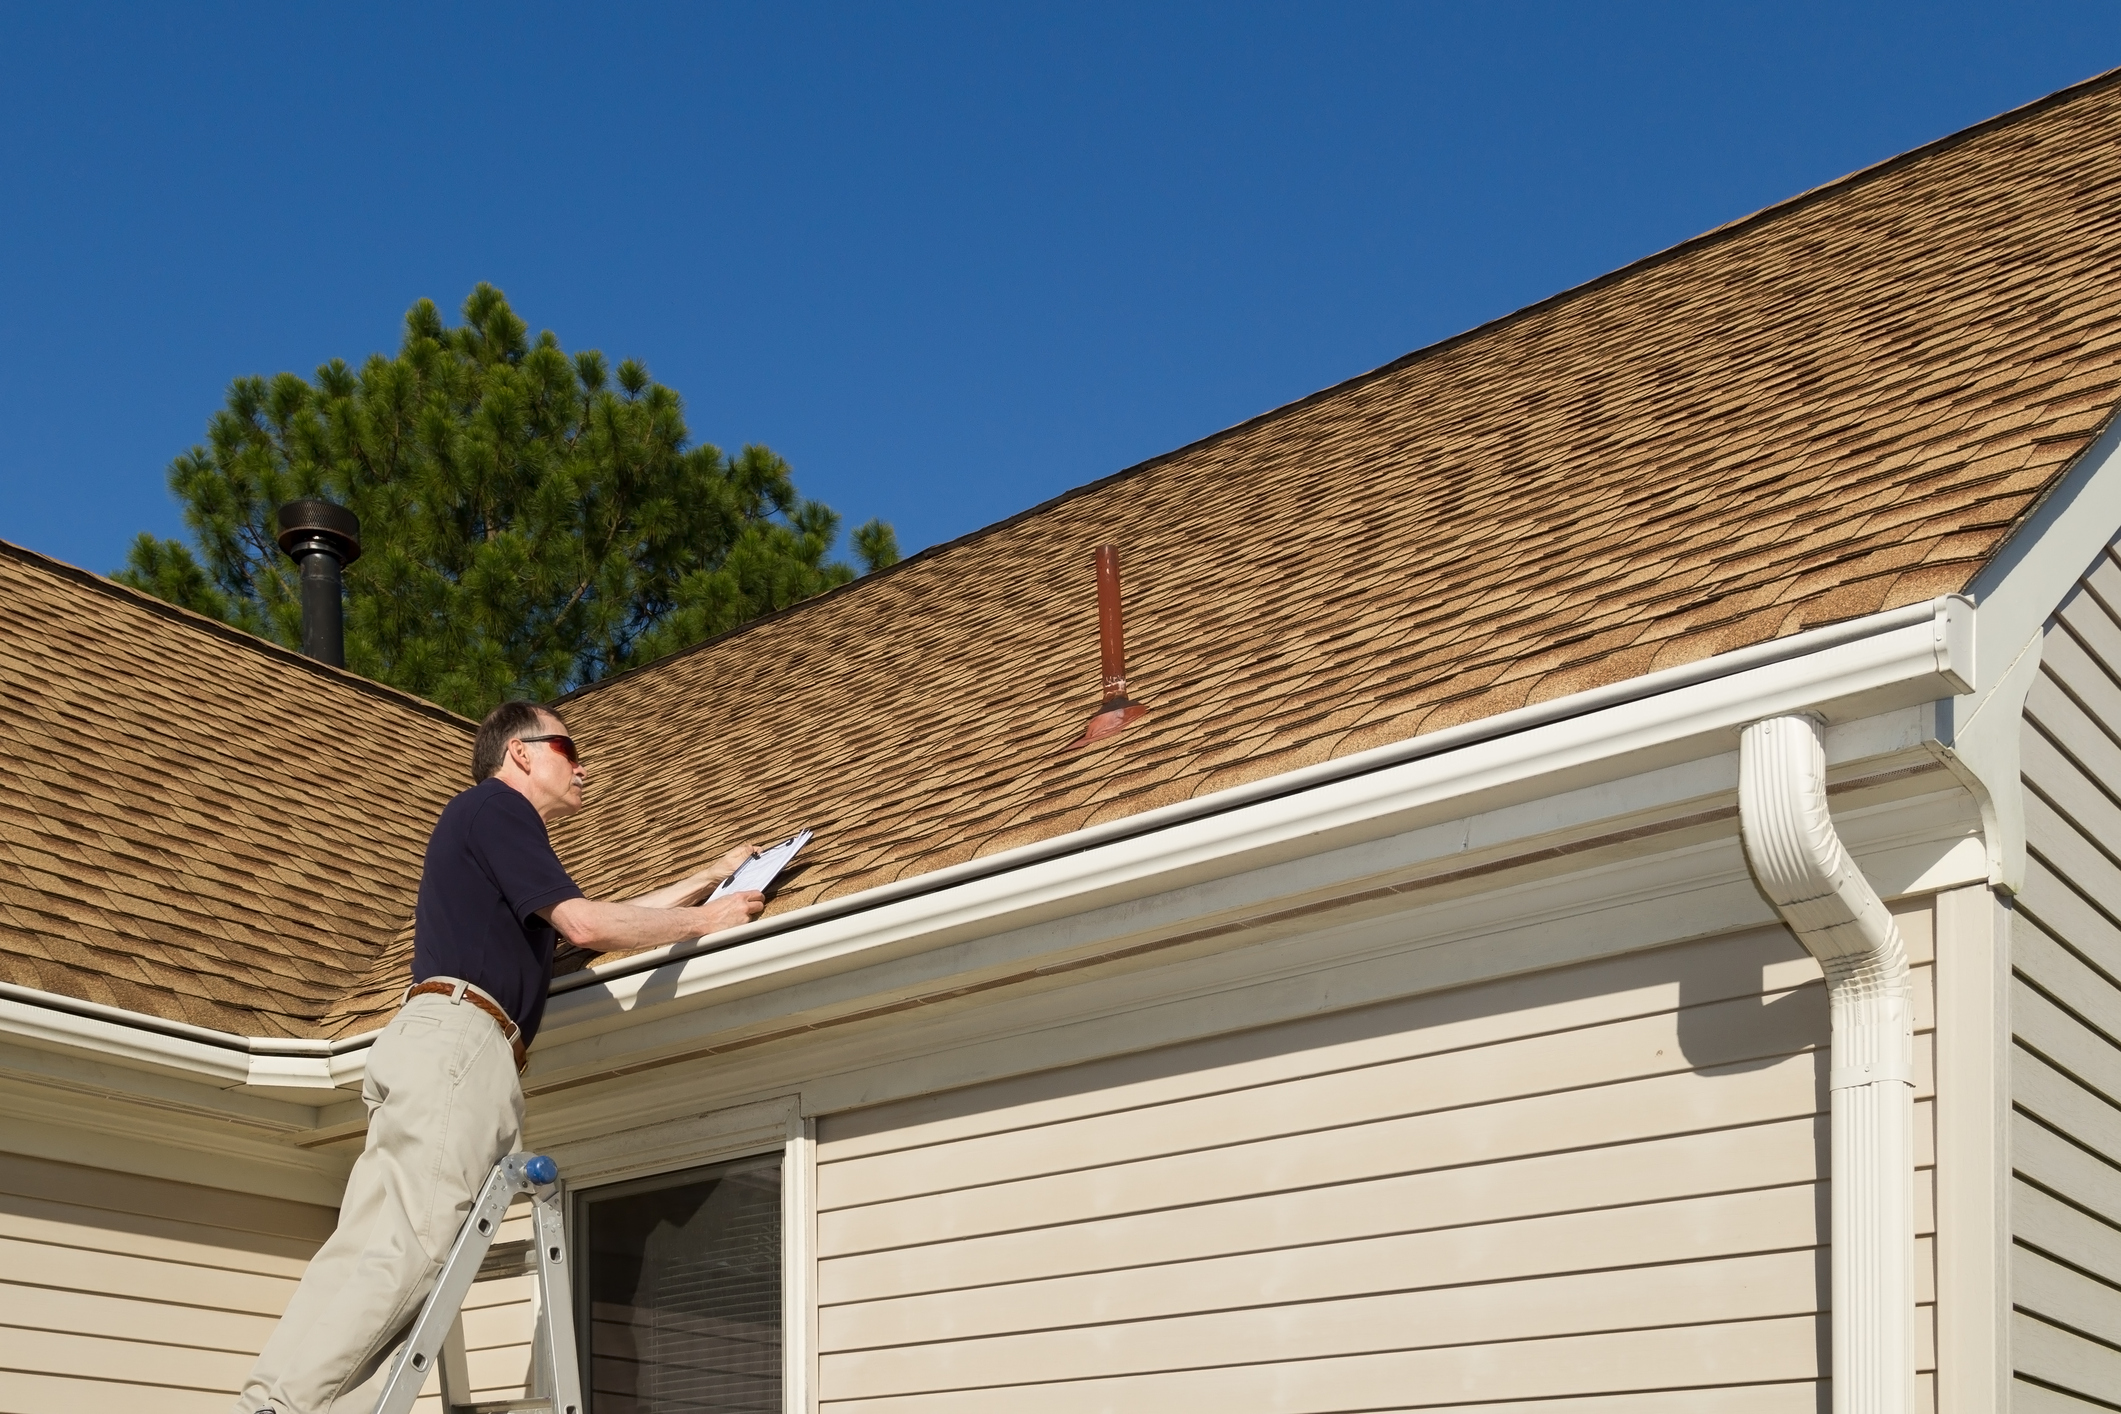 12 Tasks to Help Maintain Your Roof